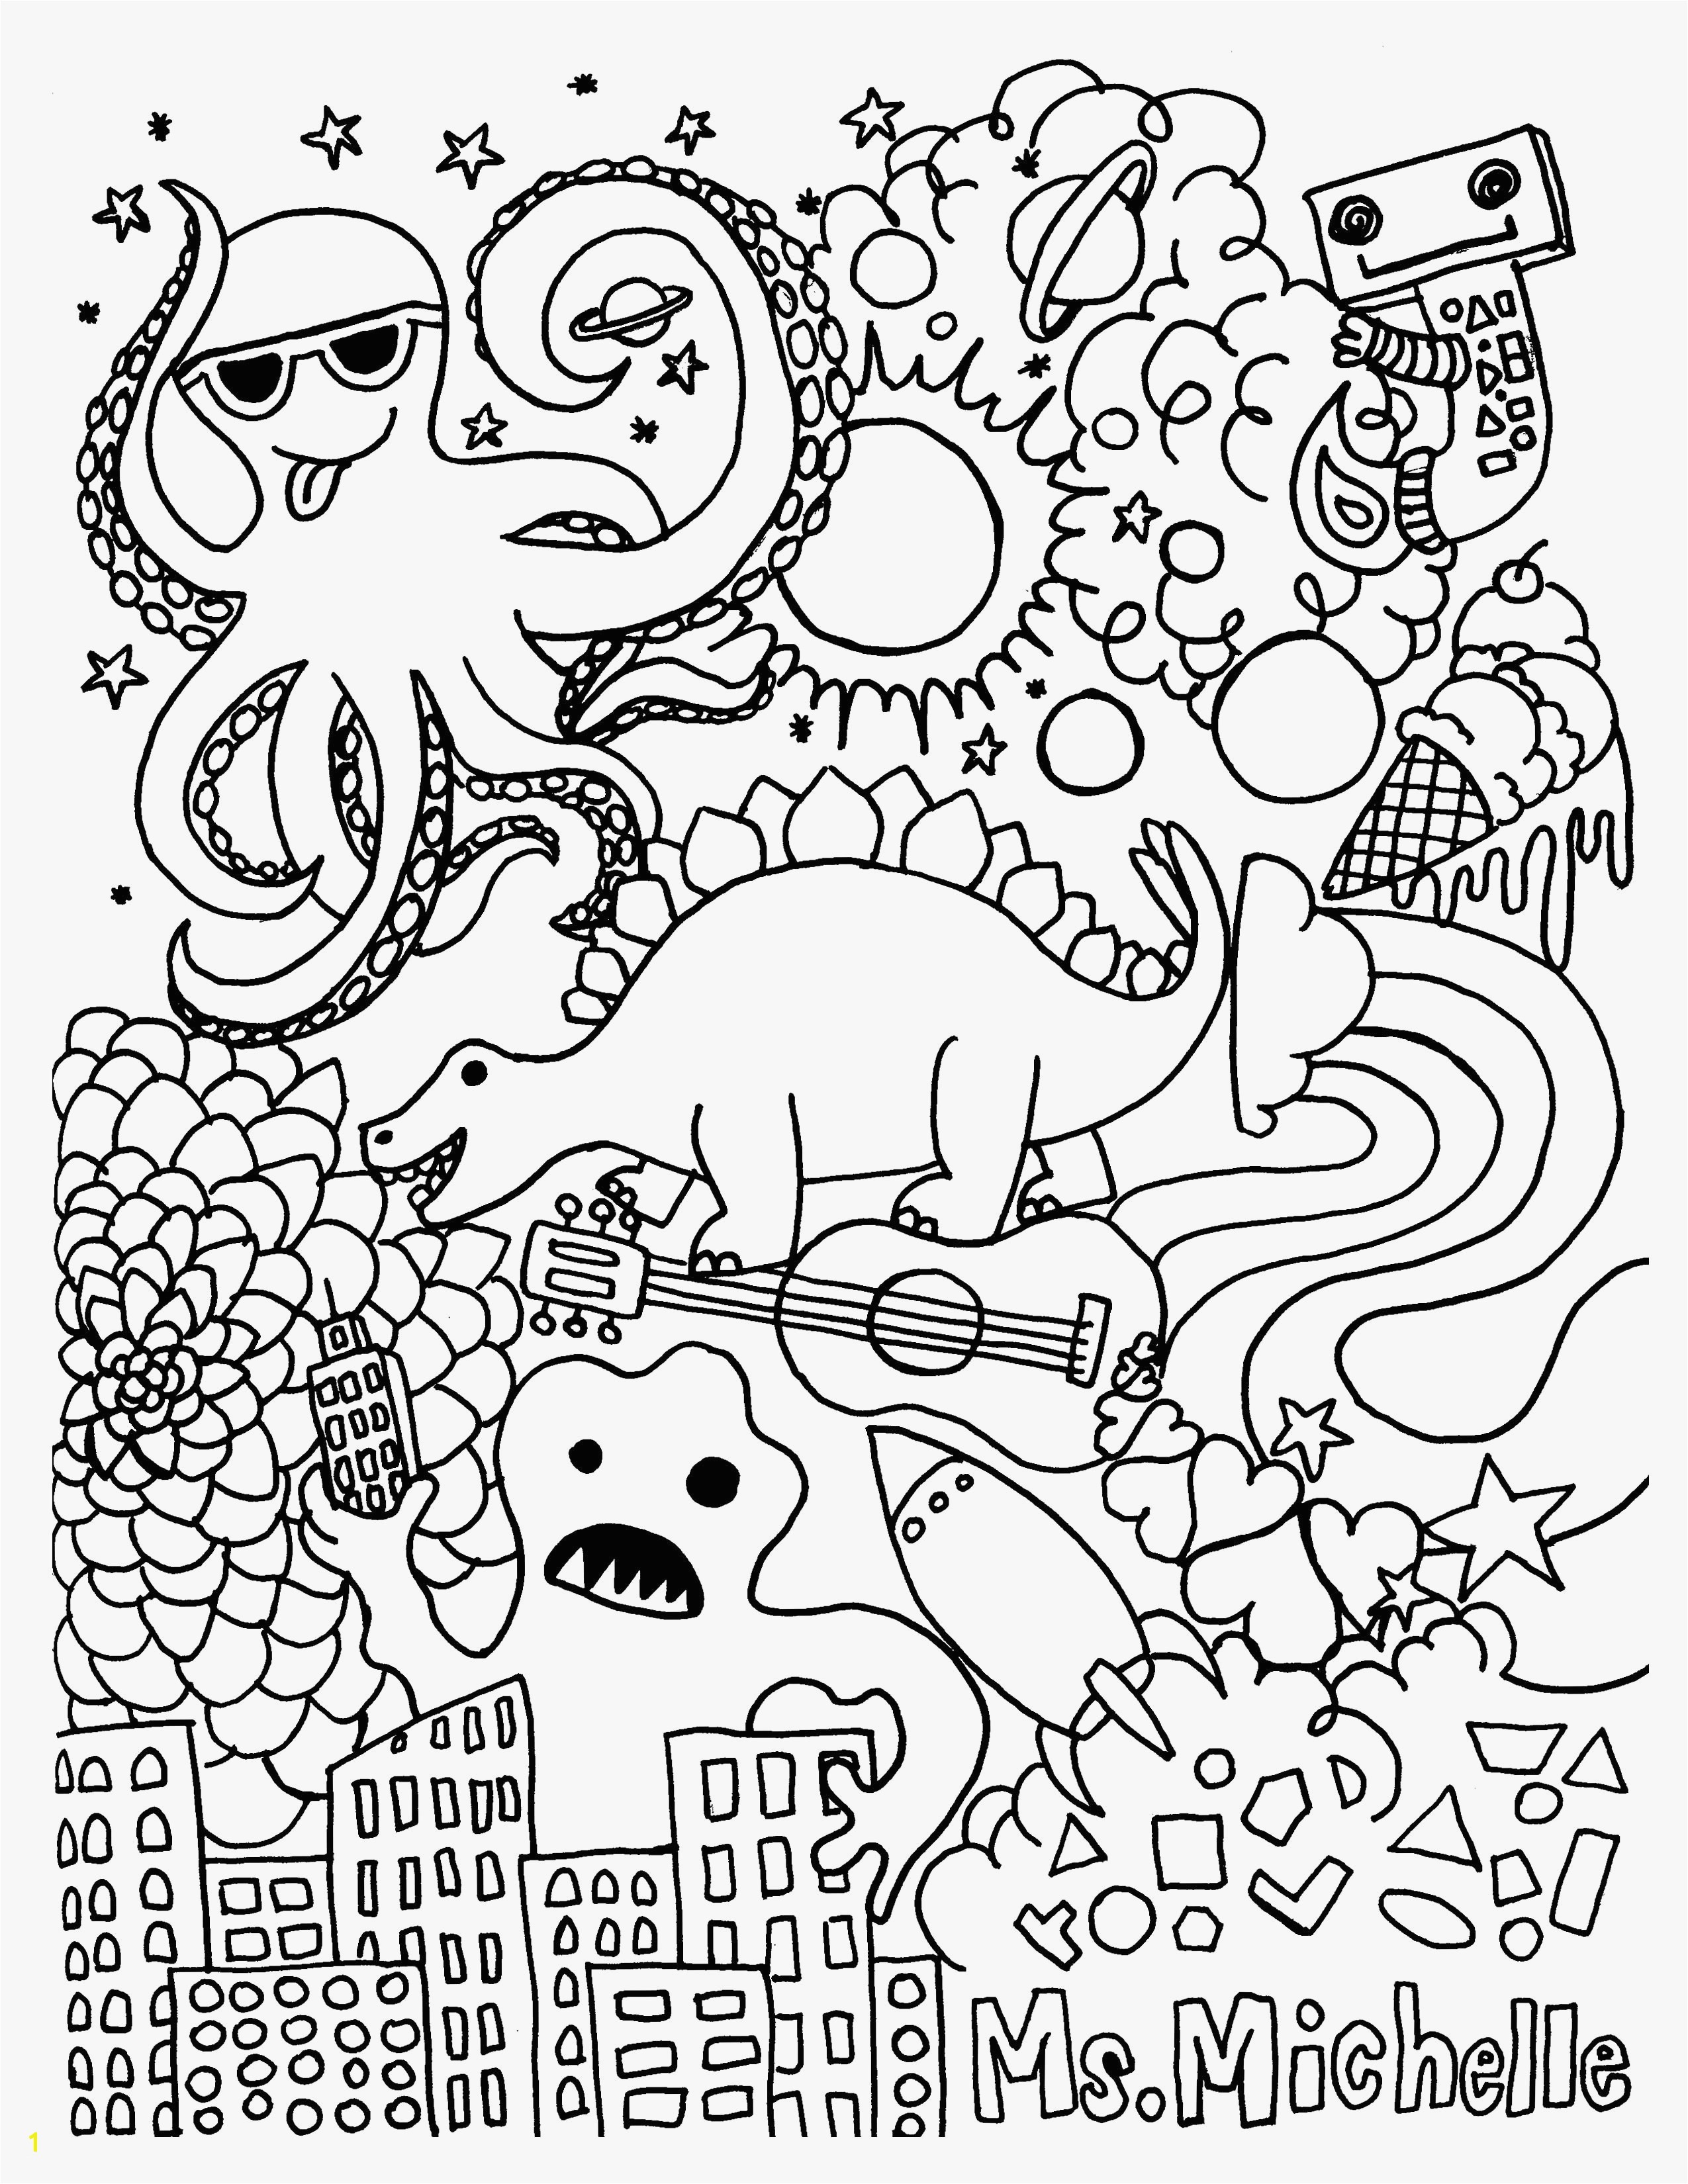 Snoop Dogg Coloring Pages 12 Elegant Hello Neighbor Coloring Pages